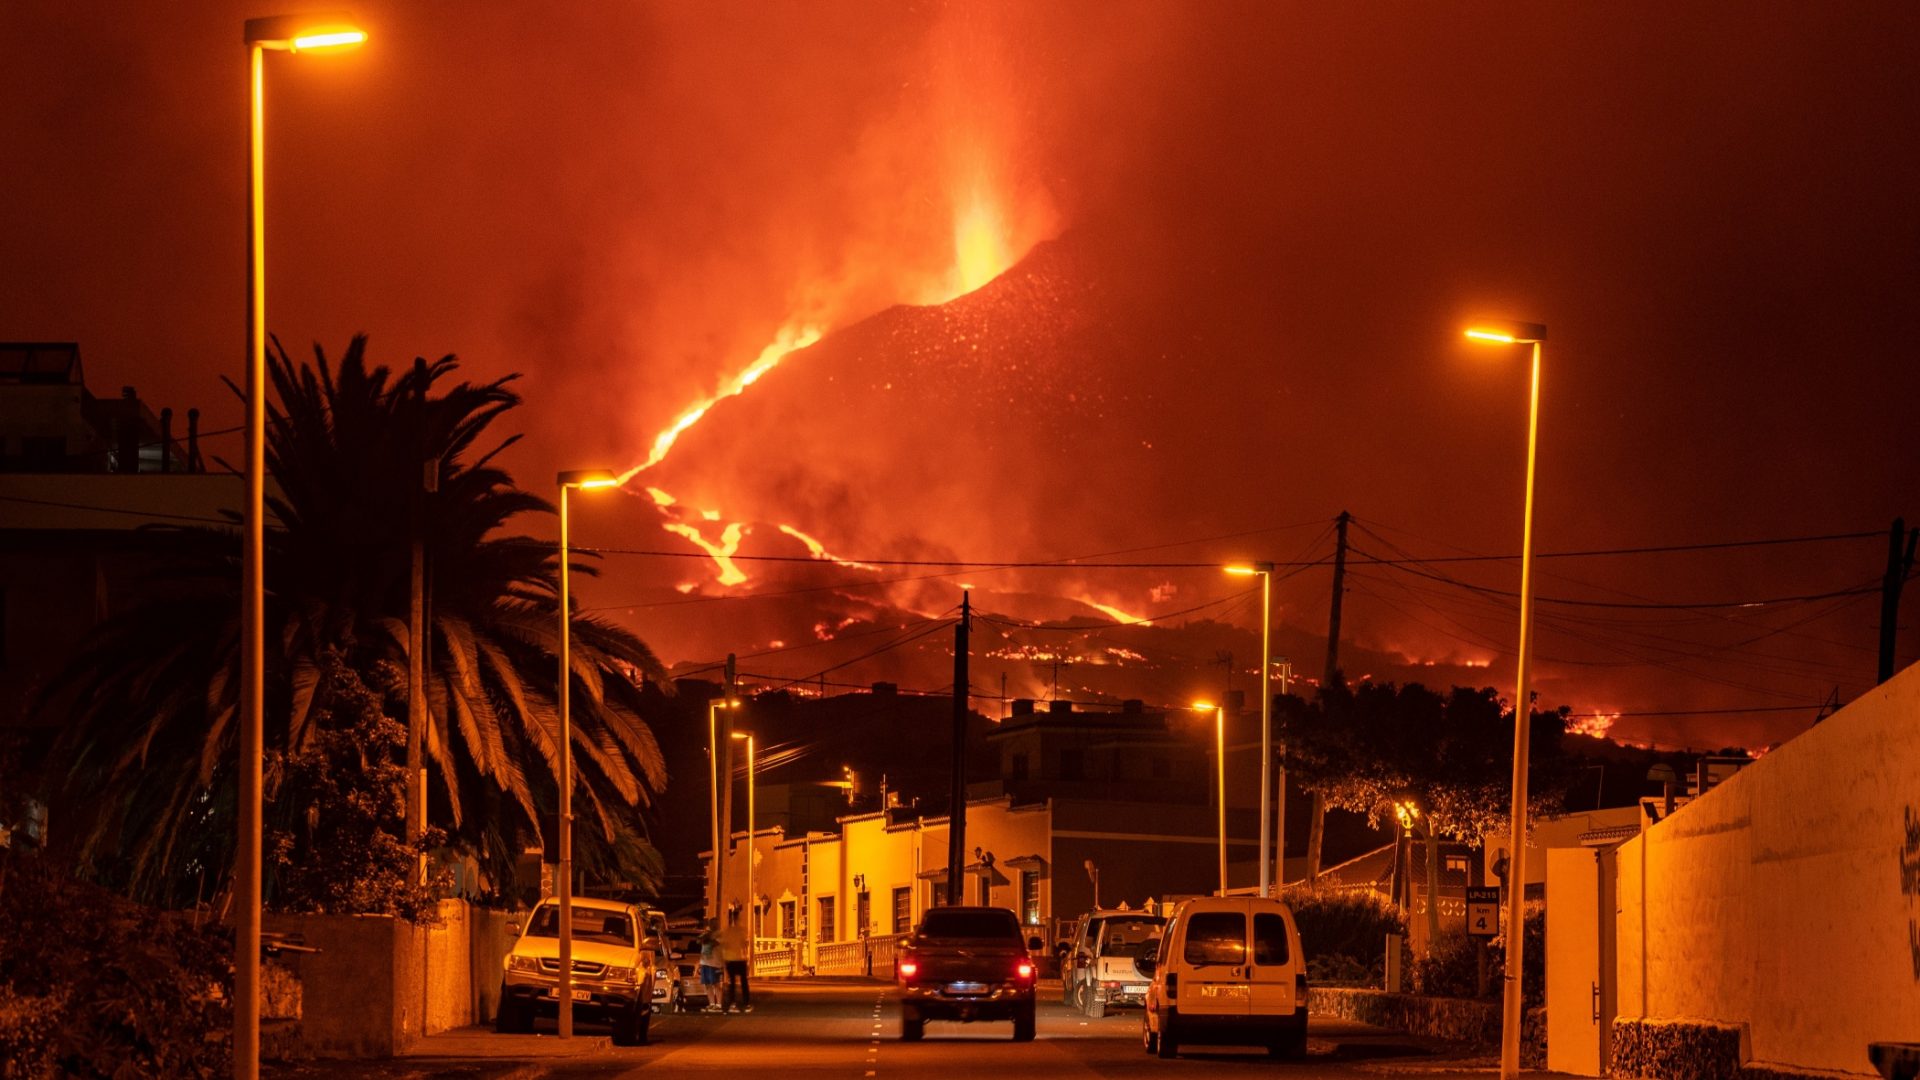 Lava flows from the Cumbre Vieja volcano on La Palma in the Canary Islands, October 2021. The numerous flows destroyed hundreds of hectares of land, but also formed peninsulas of volcanic rock, extending 
the surface of the island. Photo: Marcos del Mazo/Getty
